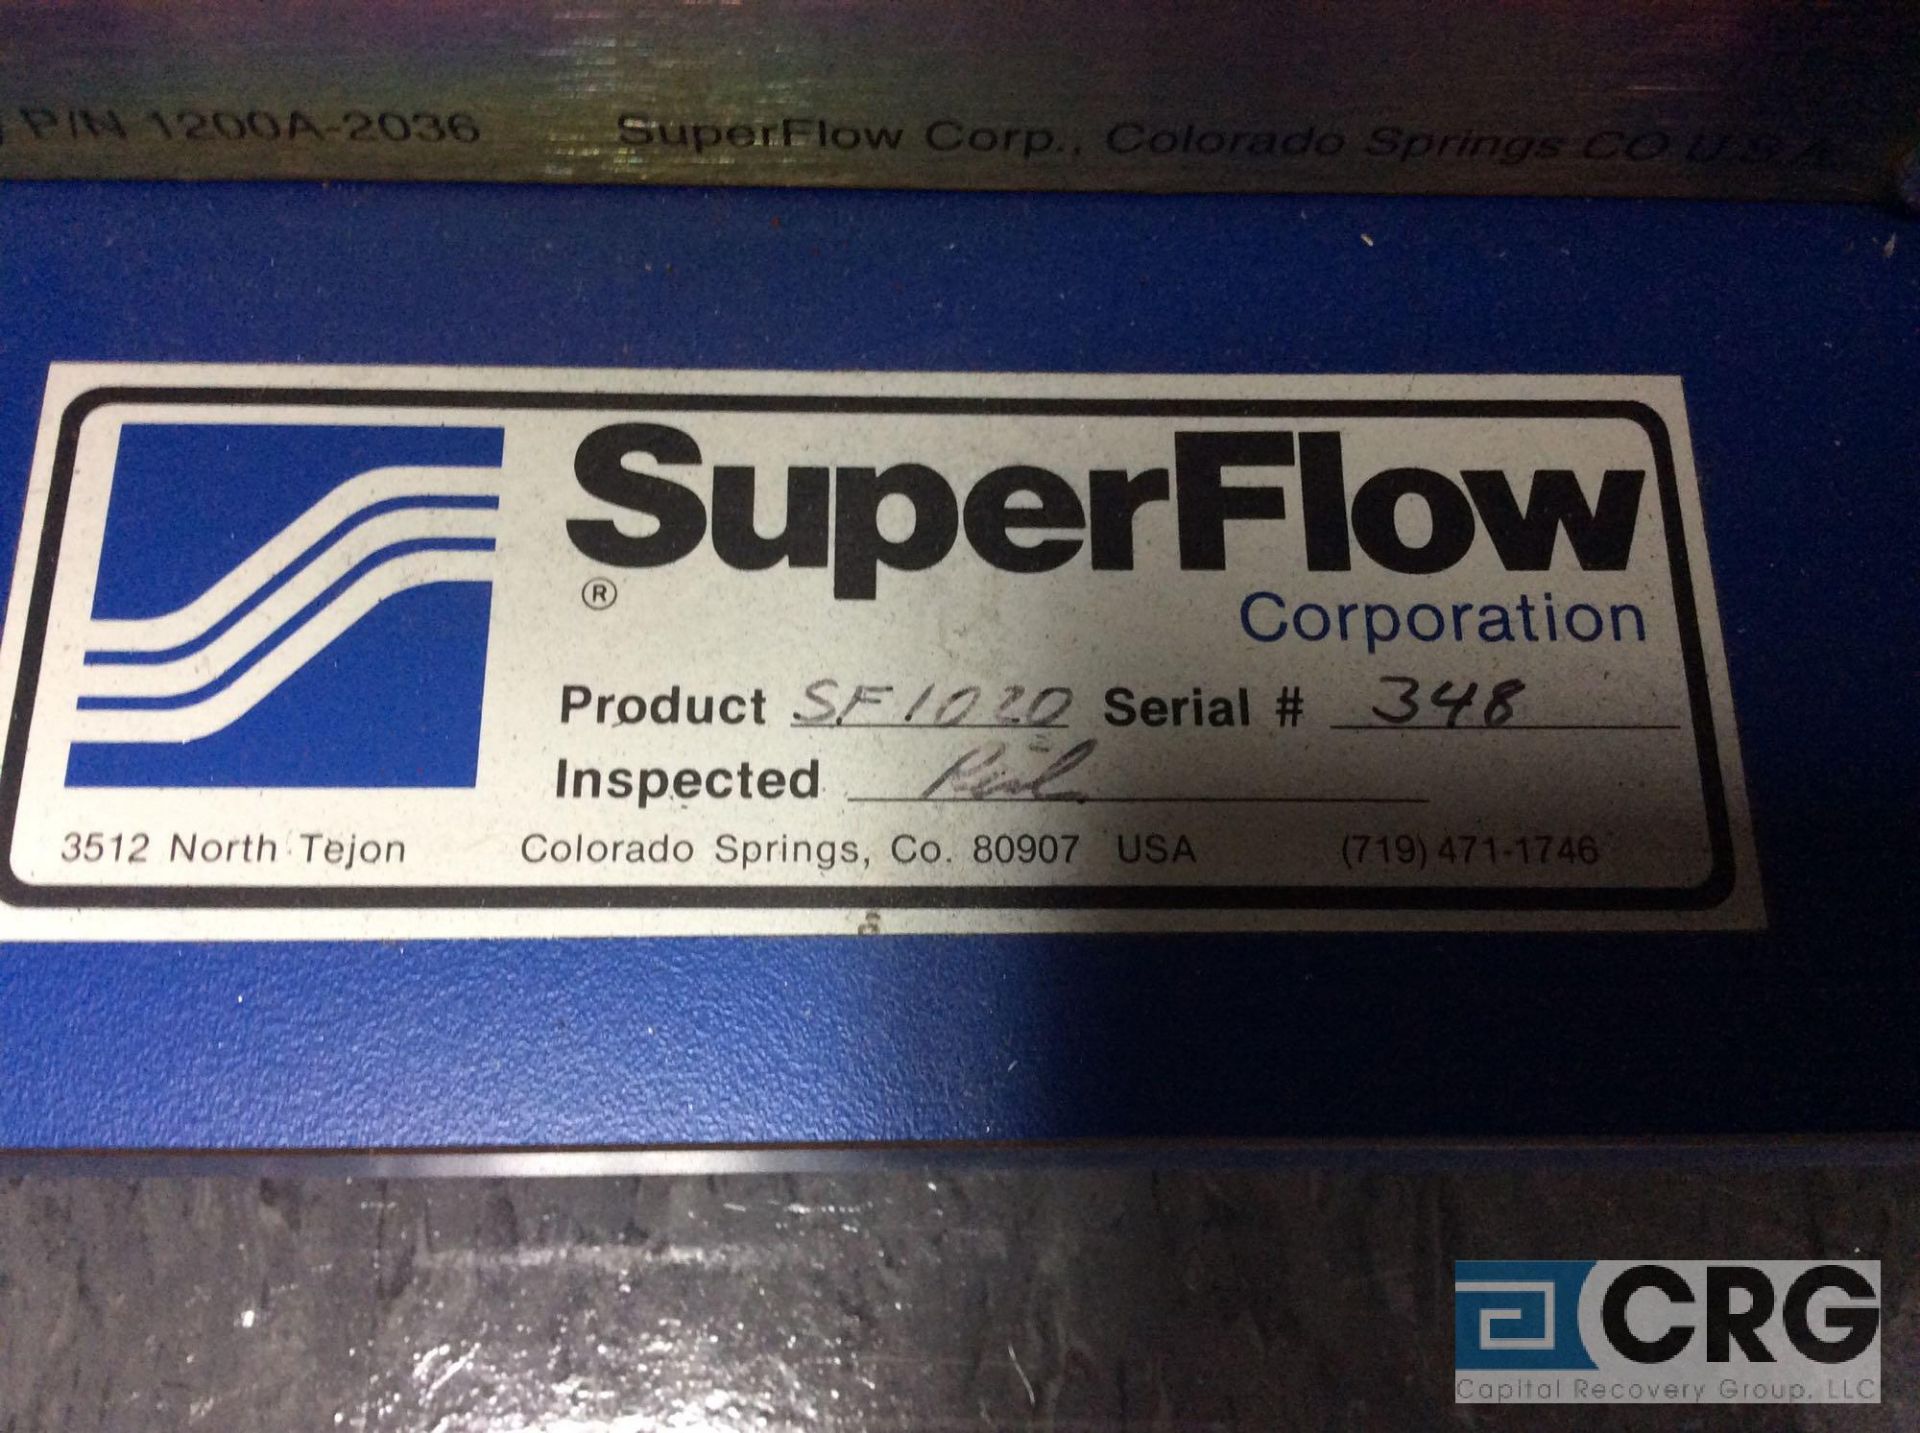 SuperFlow SF1020 Probench computerized flowbench with computer, printer, accessories - Image 4 of 5